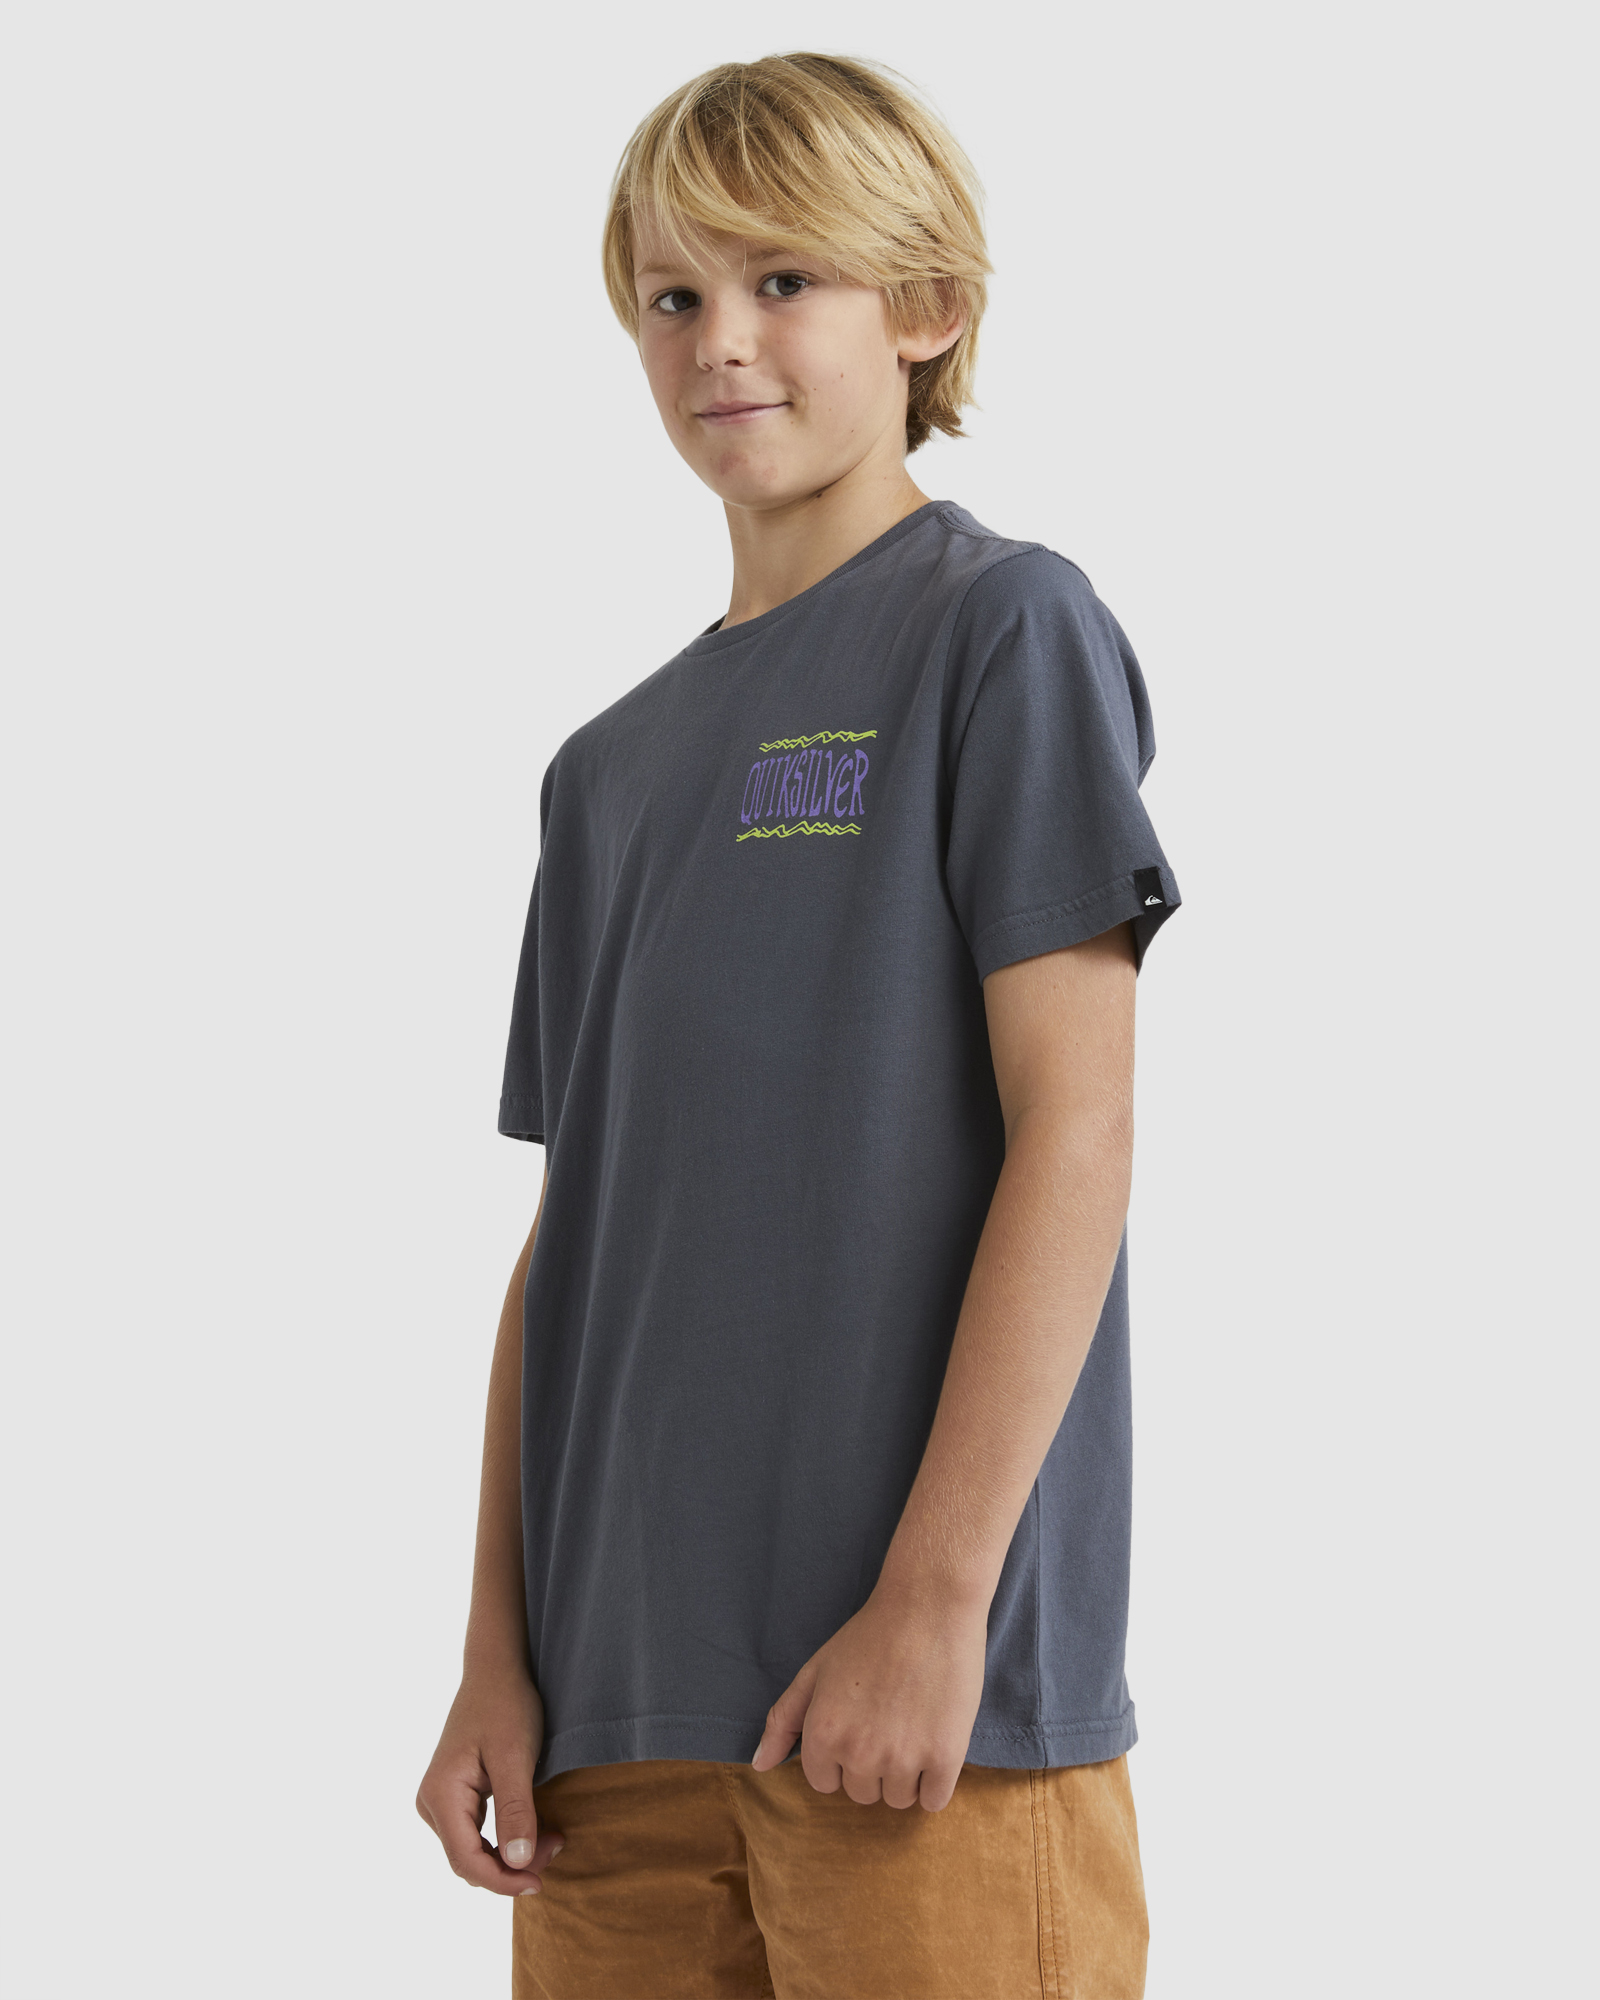 Quiksilver Boys 8-16 Taking Roots Tee - Iron Gate | SurfStitch